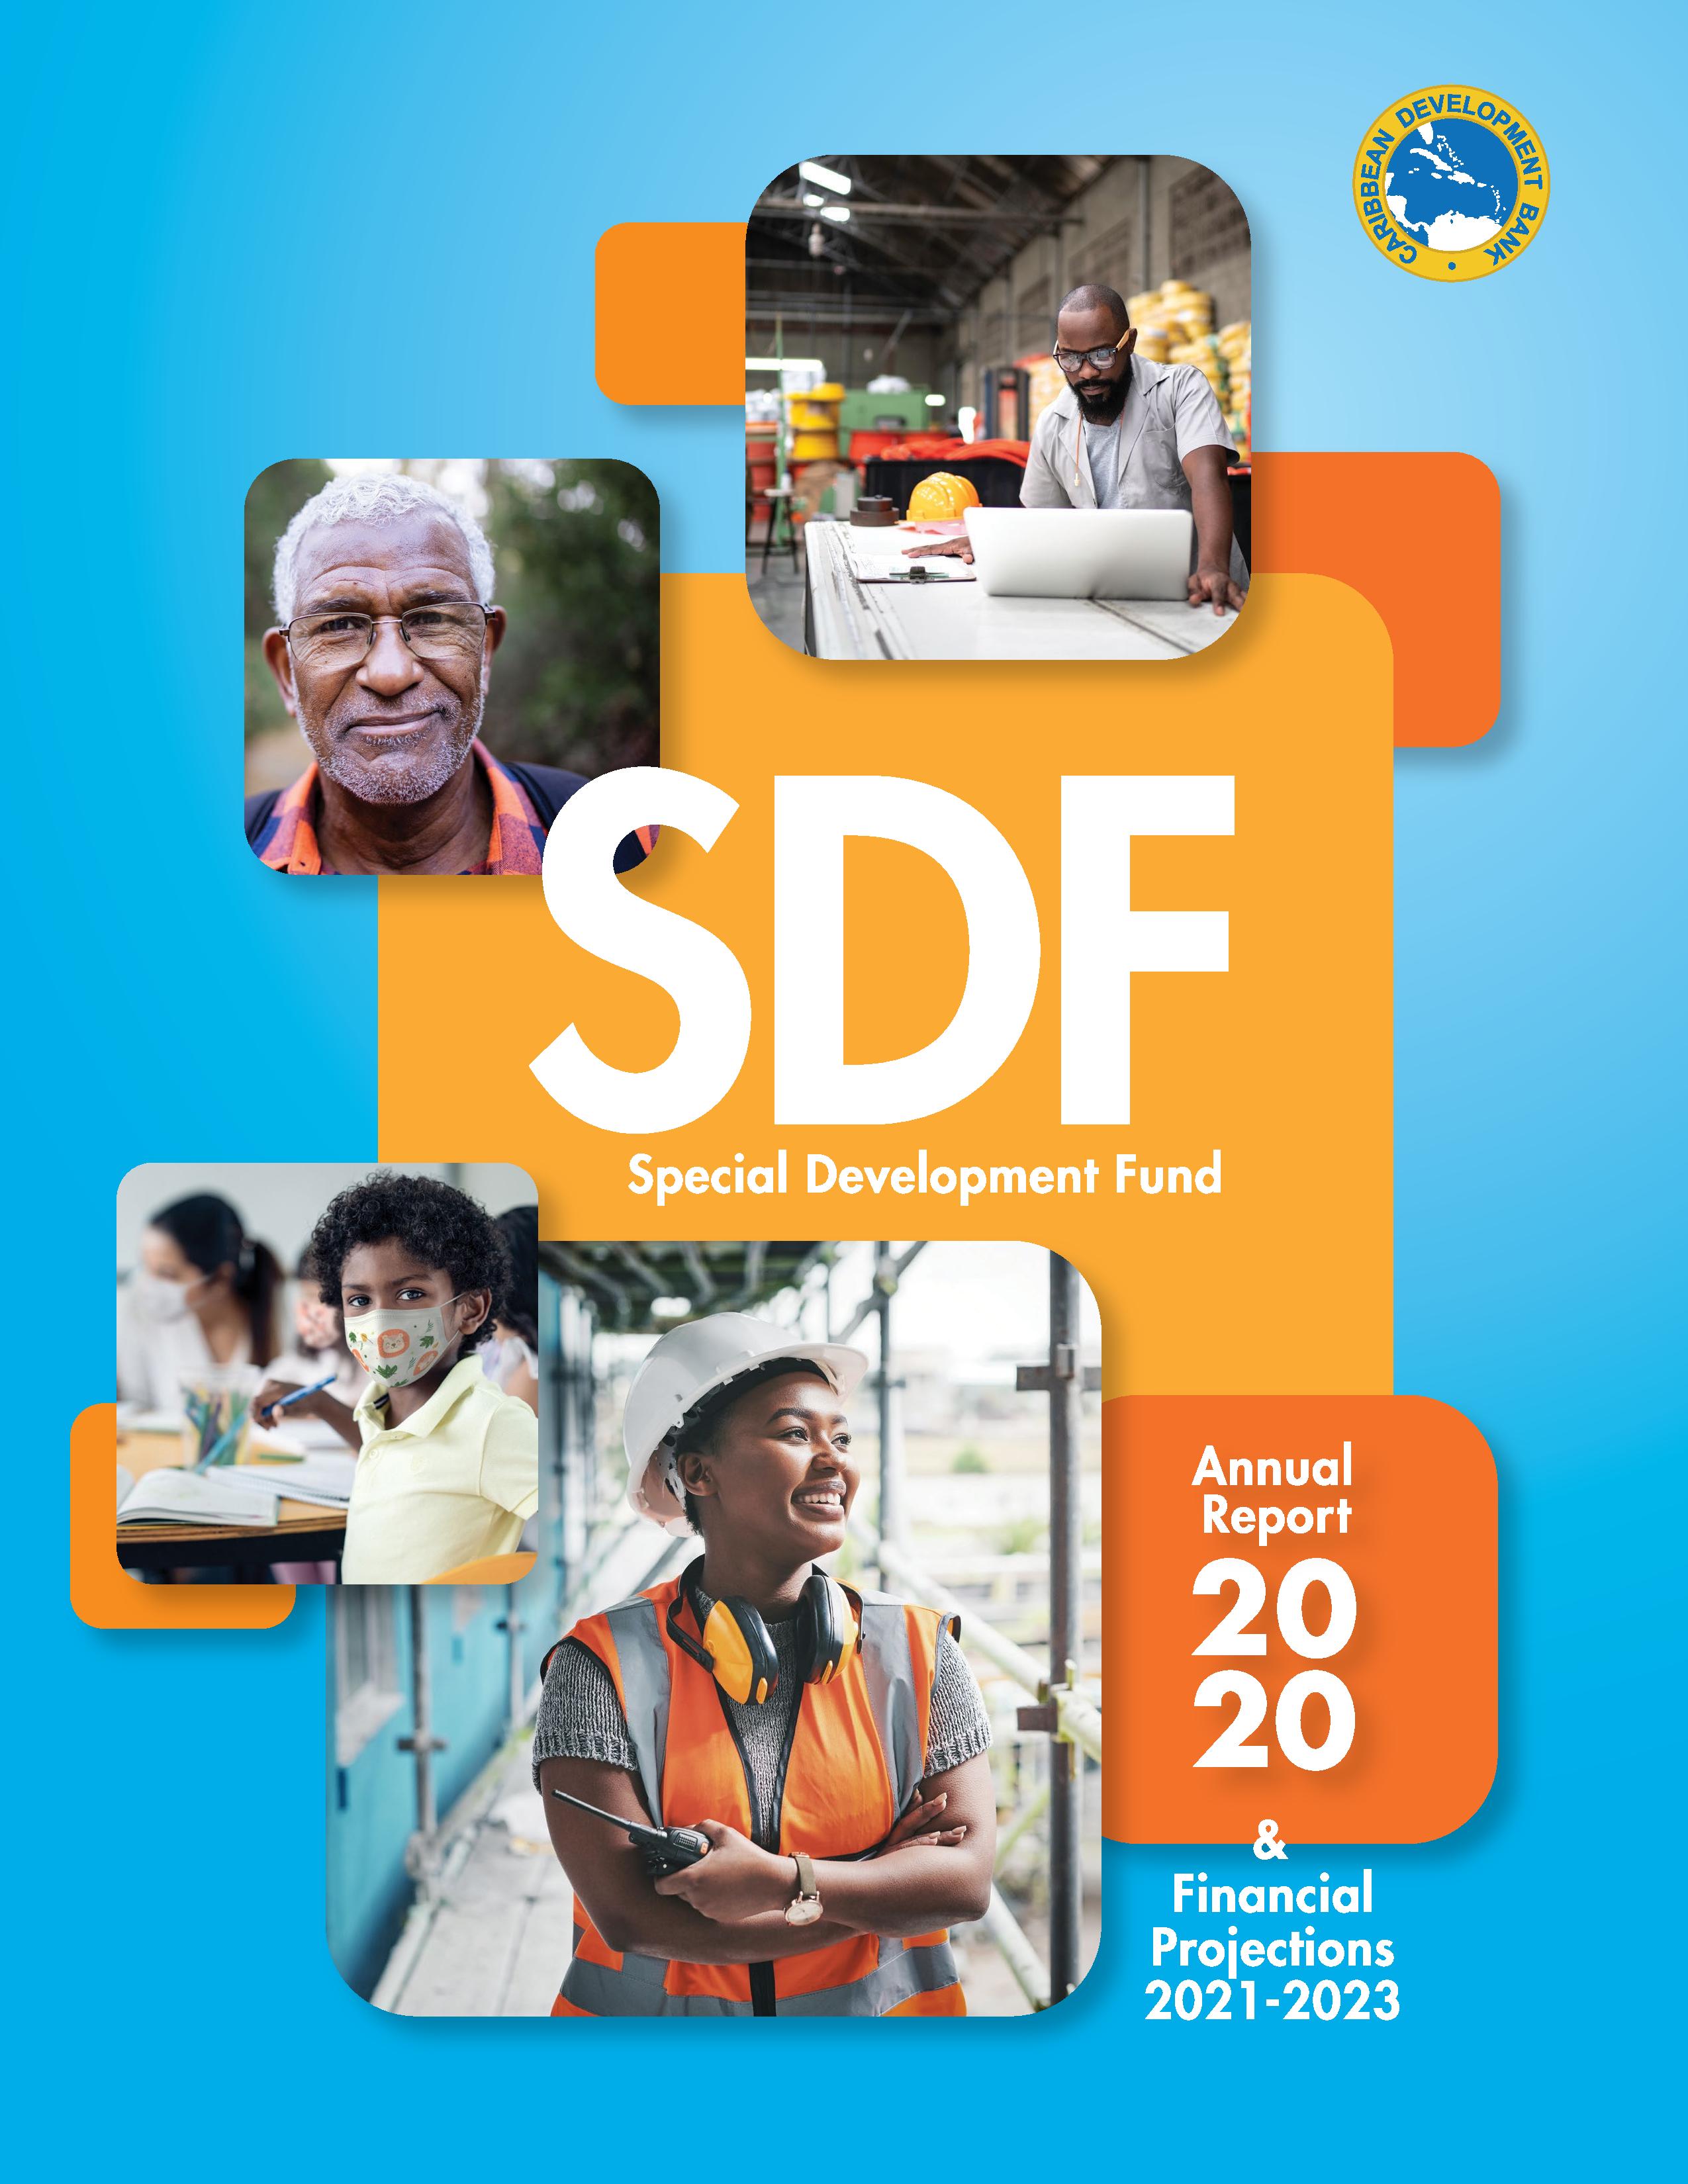 In 4 individual photos, the report cover shows a man in a white, open shirt und grey T-Shirt, leaning over a computer in a depot hall; the portrait of senior citizen looking into the camera while standing in the wild; a pupil in a yellow shirt and a face mask at a desk; and a female construction worker with a white helmet and an orange vest, holding a walkie talkie in her hand.